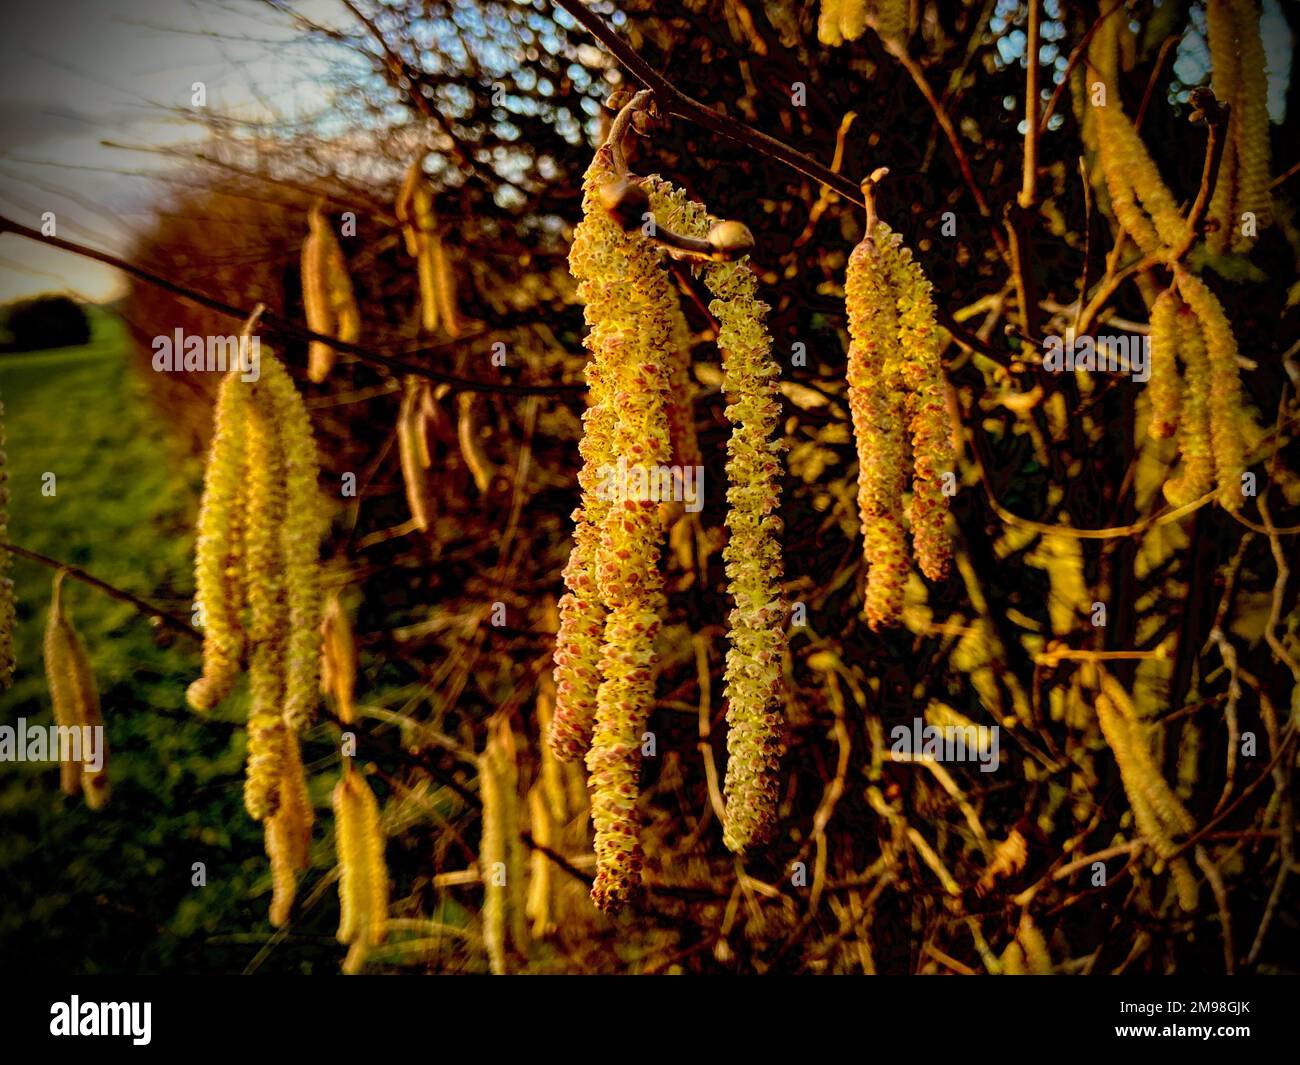 Catkins in Winter Thaxted Essex England January 2023 A catkin or ament is a slim, cylindrical flower cluster (a spike), with inconspicuous or no petals, usually wind-pollinated (anemophilous) but sometimes insect-pollinated (as in Salix). They contain many, usually unisexual flowers, arranged closely along a central stem that is often drooping. They are found in many plant families, including Betulaceae, Fagaceae, Moraceae, and Salicaceae. Stock Photo